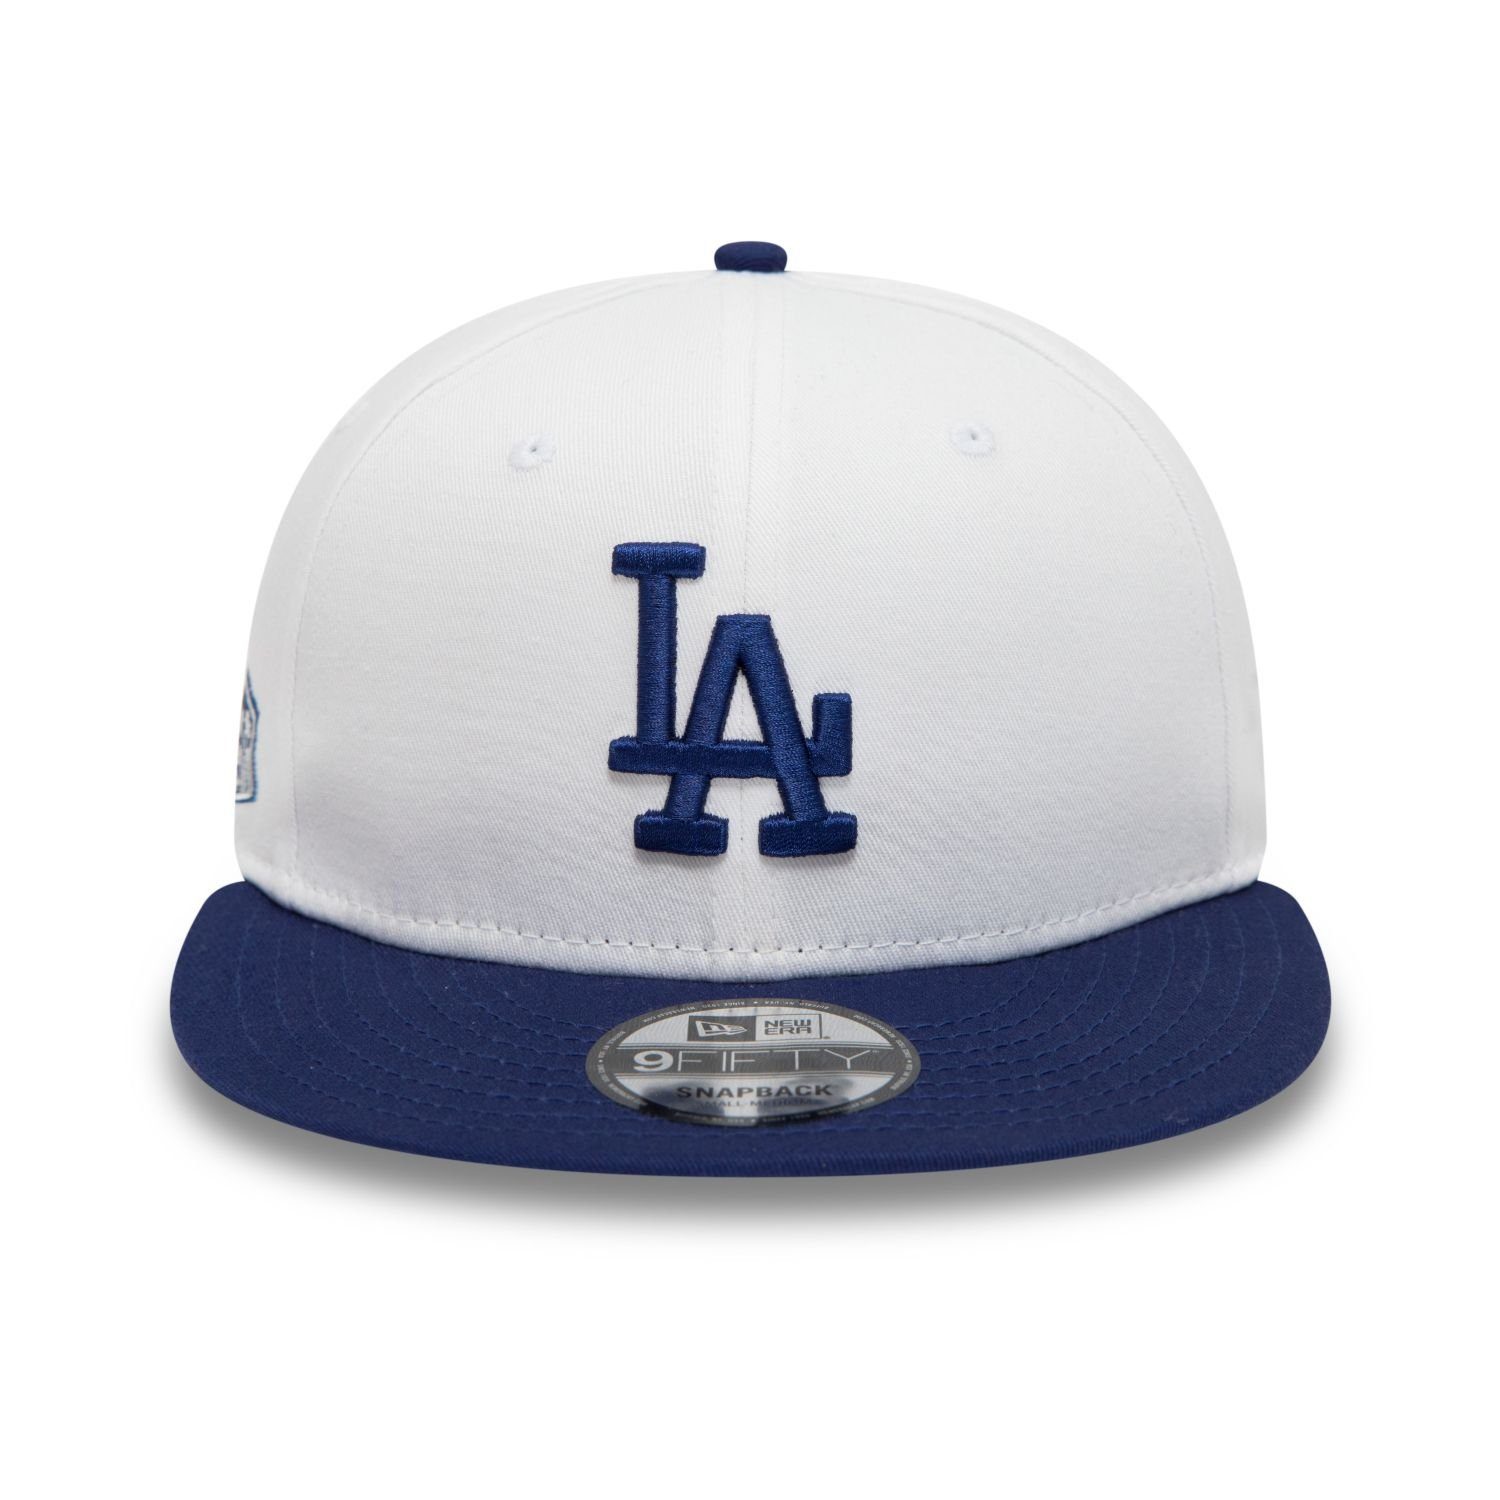 Dodgers Los Era Angeles 9Fifty Cap Snapback New PATCH SIDE